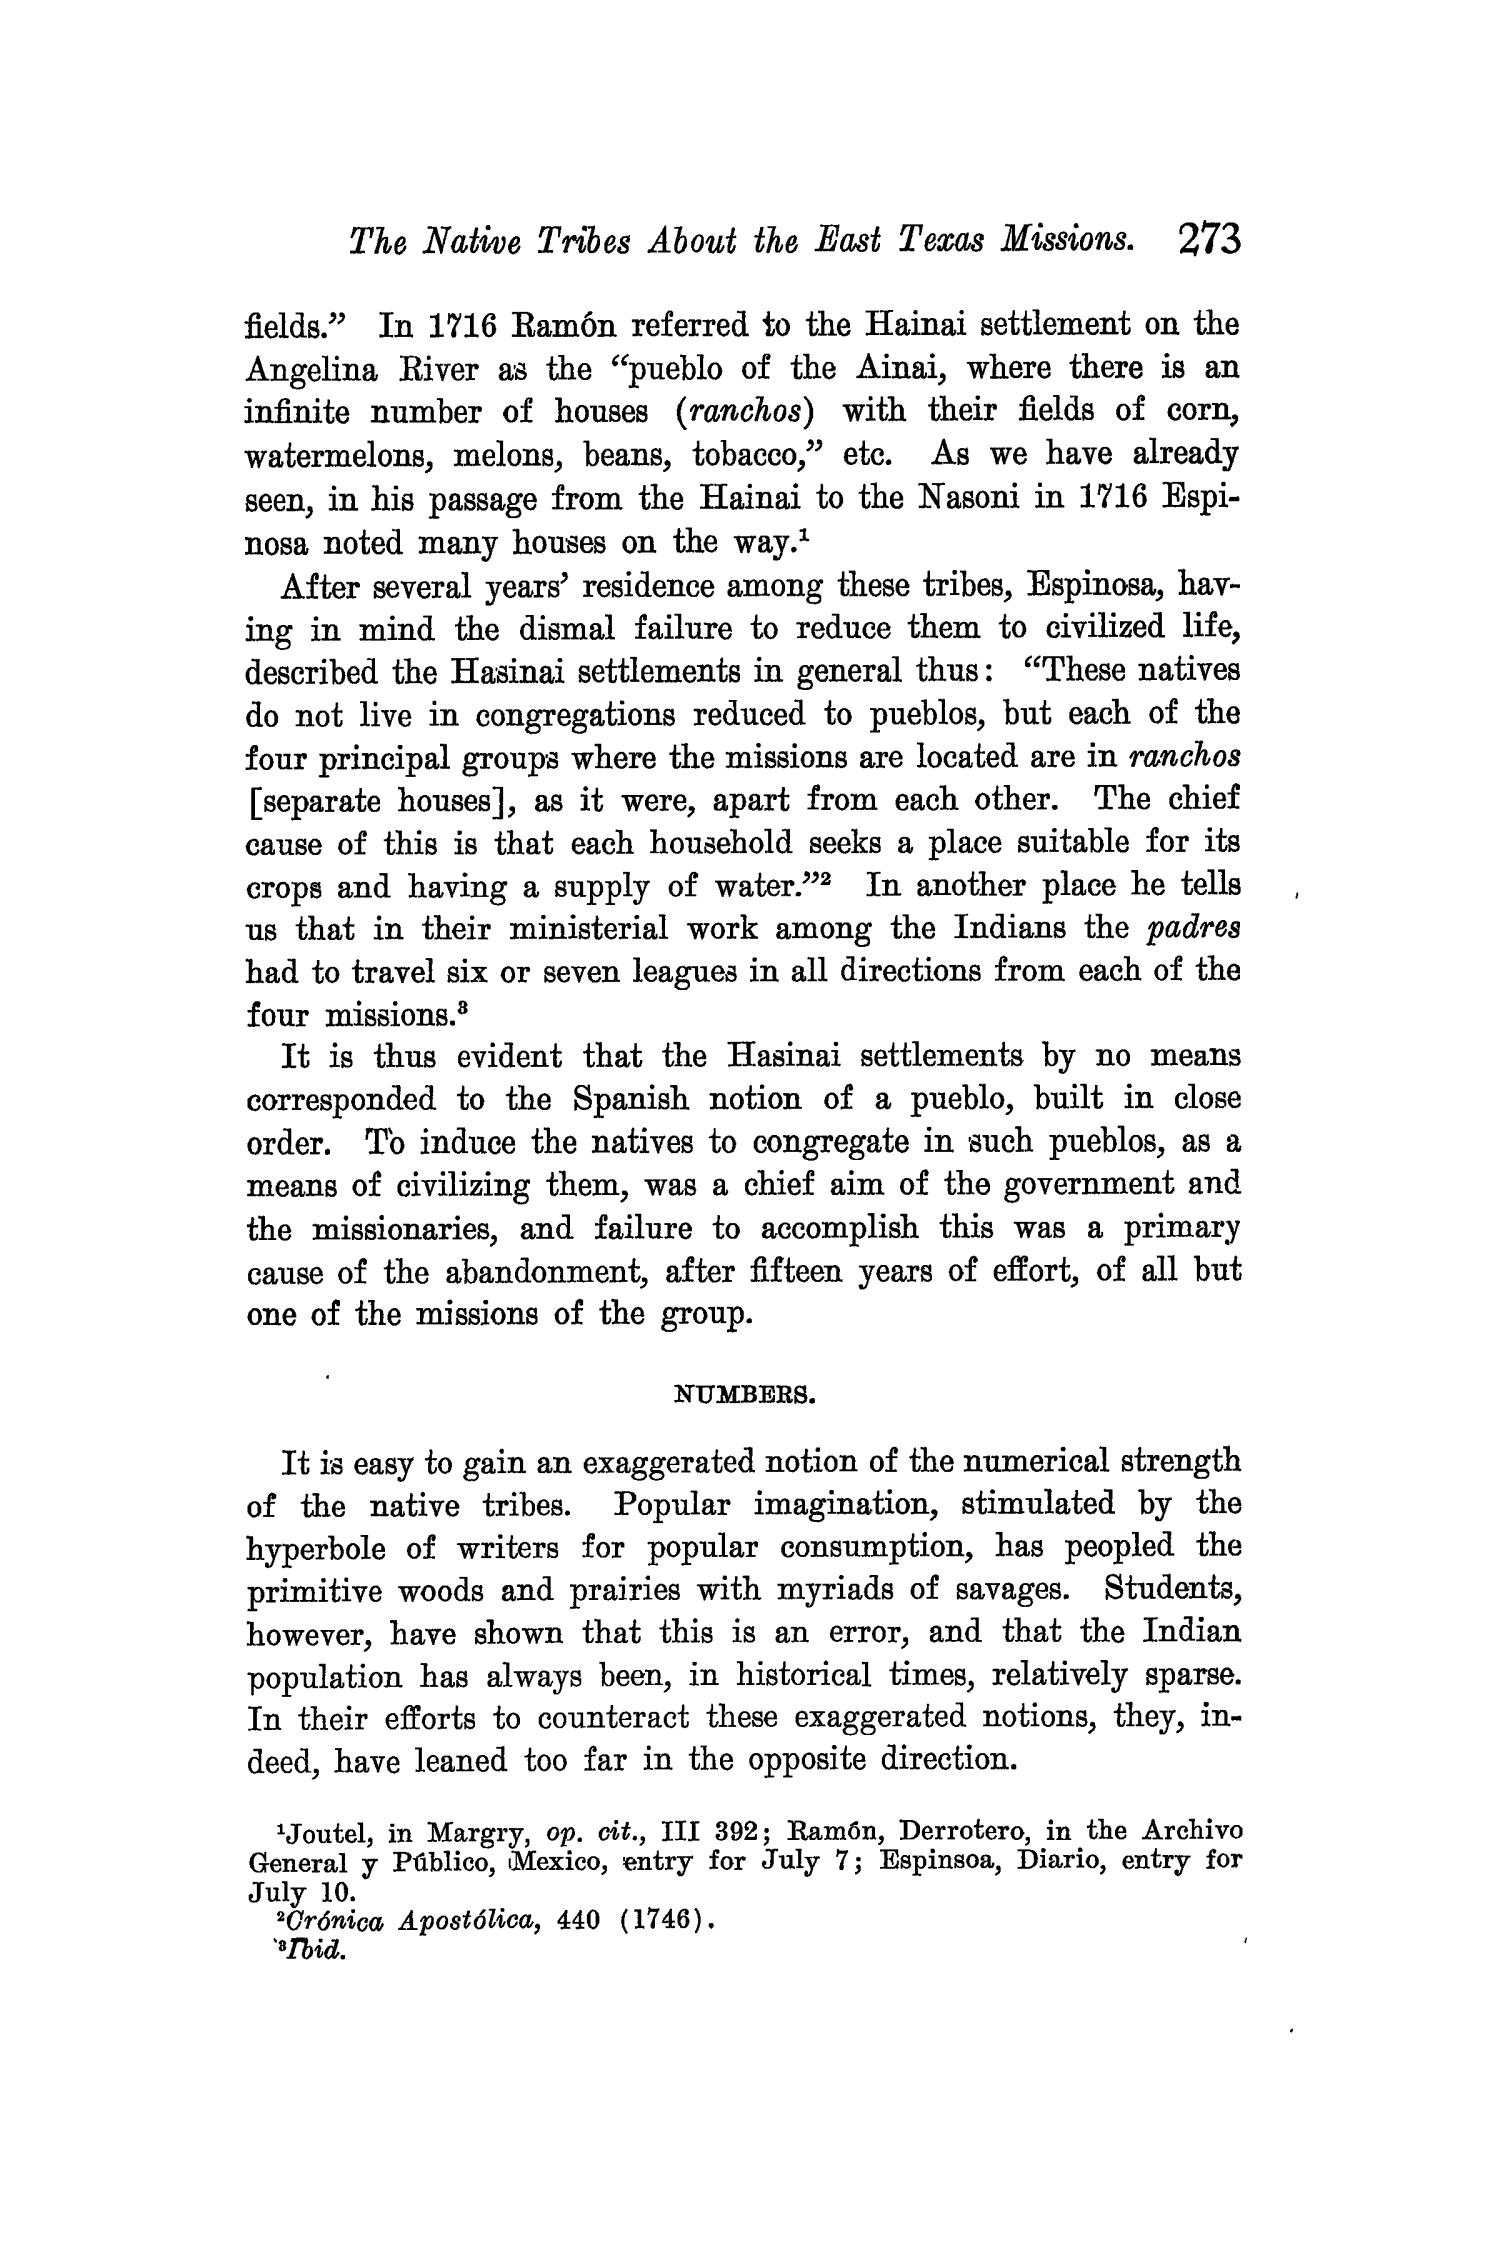 The Quarterly of the Texas State Historical Association, Volume 11, July 1907 - April, 1908
                                                
                                                    273
                                                